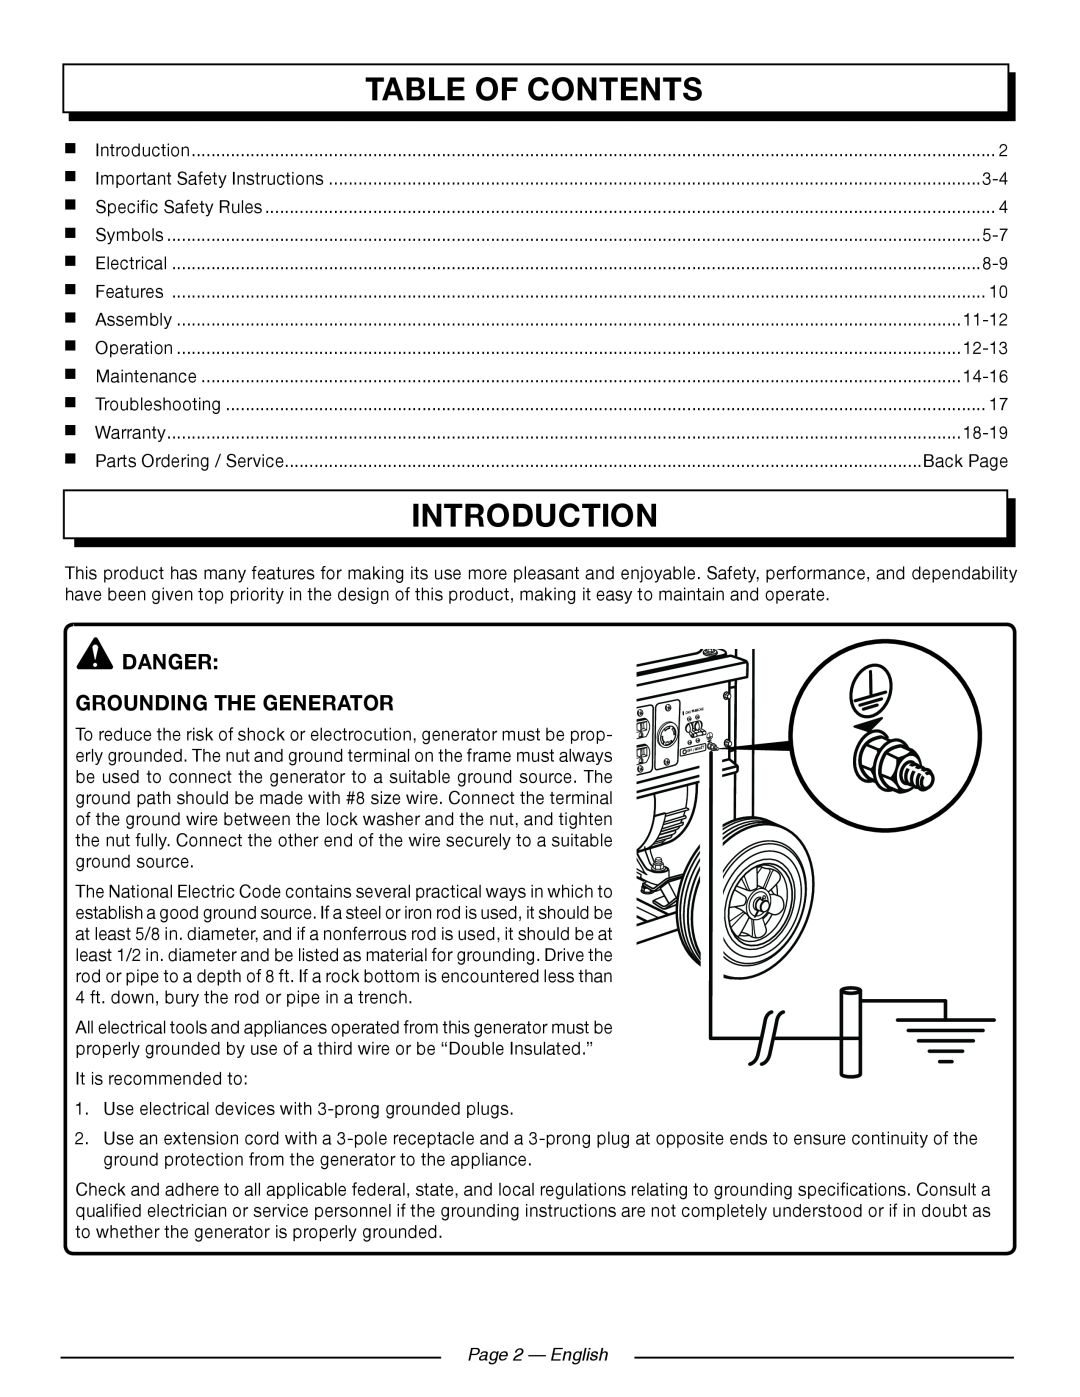 Homelite HGCA5000 manuel dutilisation Introduction, Danger Grounding The Generator, Page 2 - English, Table Of Contents 